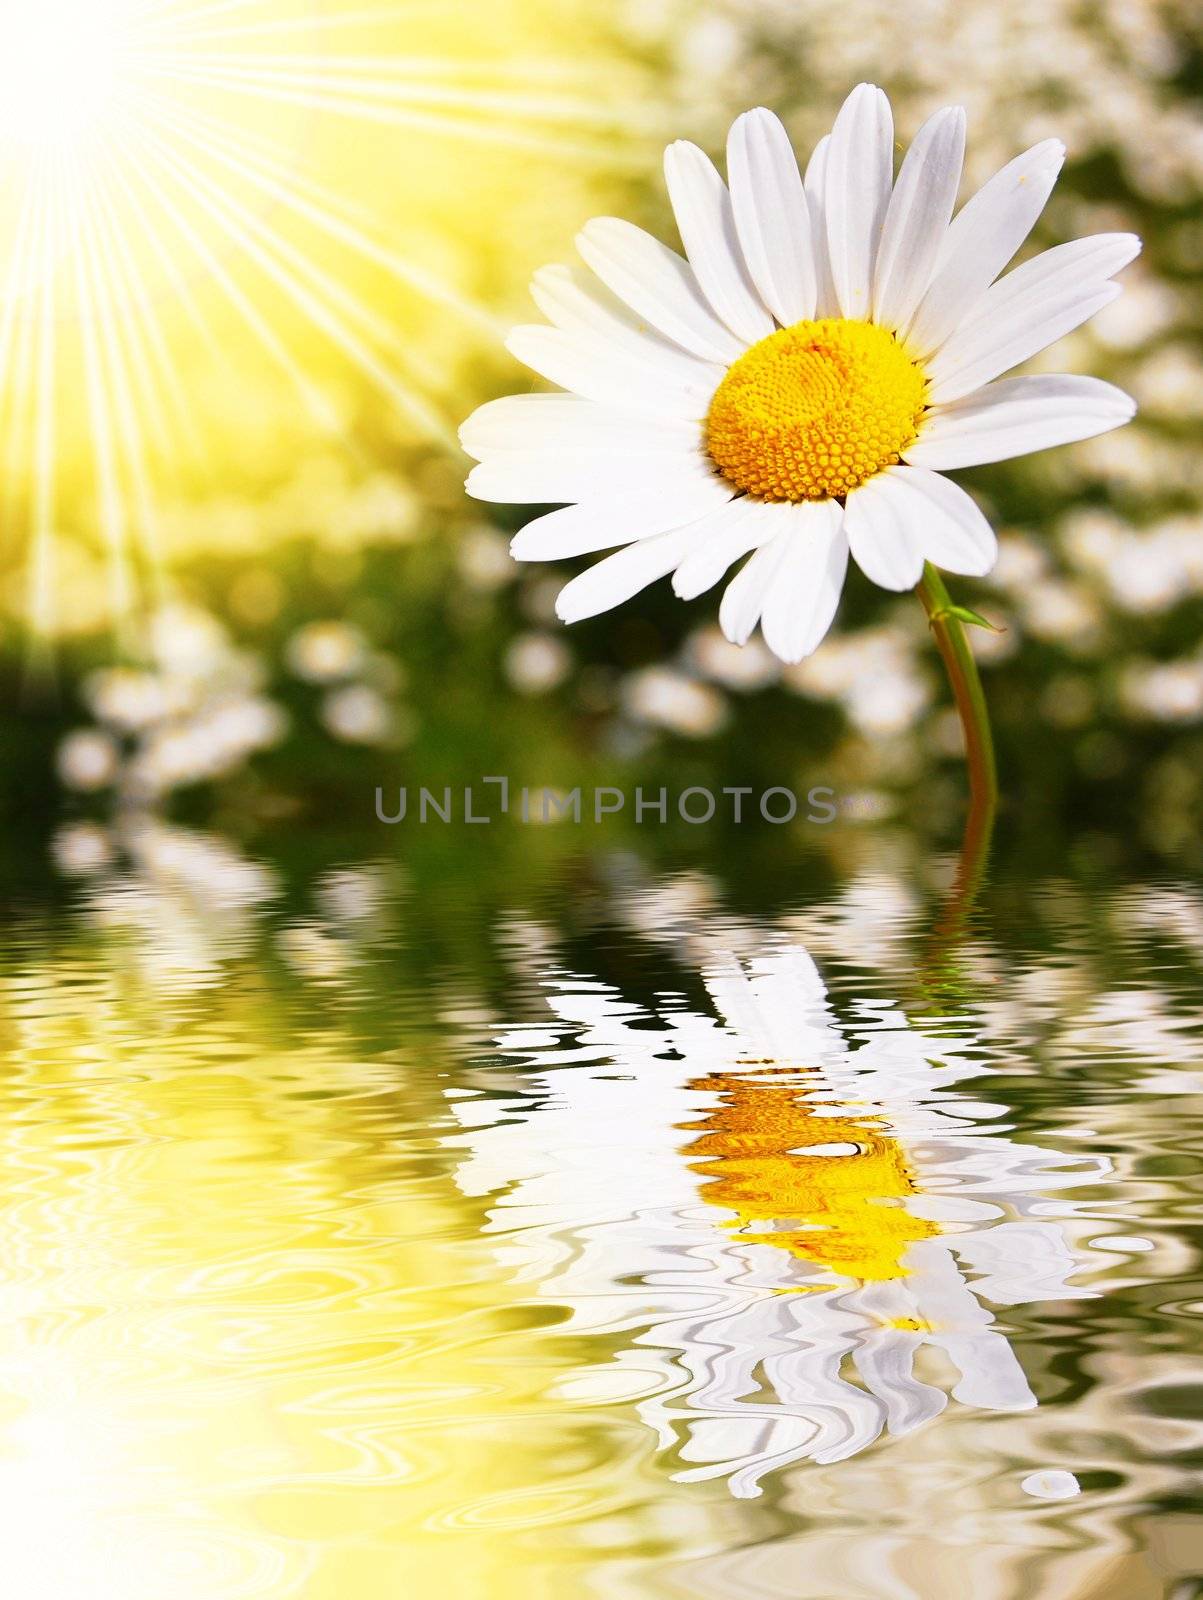 daisy flowers in summer with water reflection and copyspace